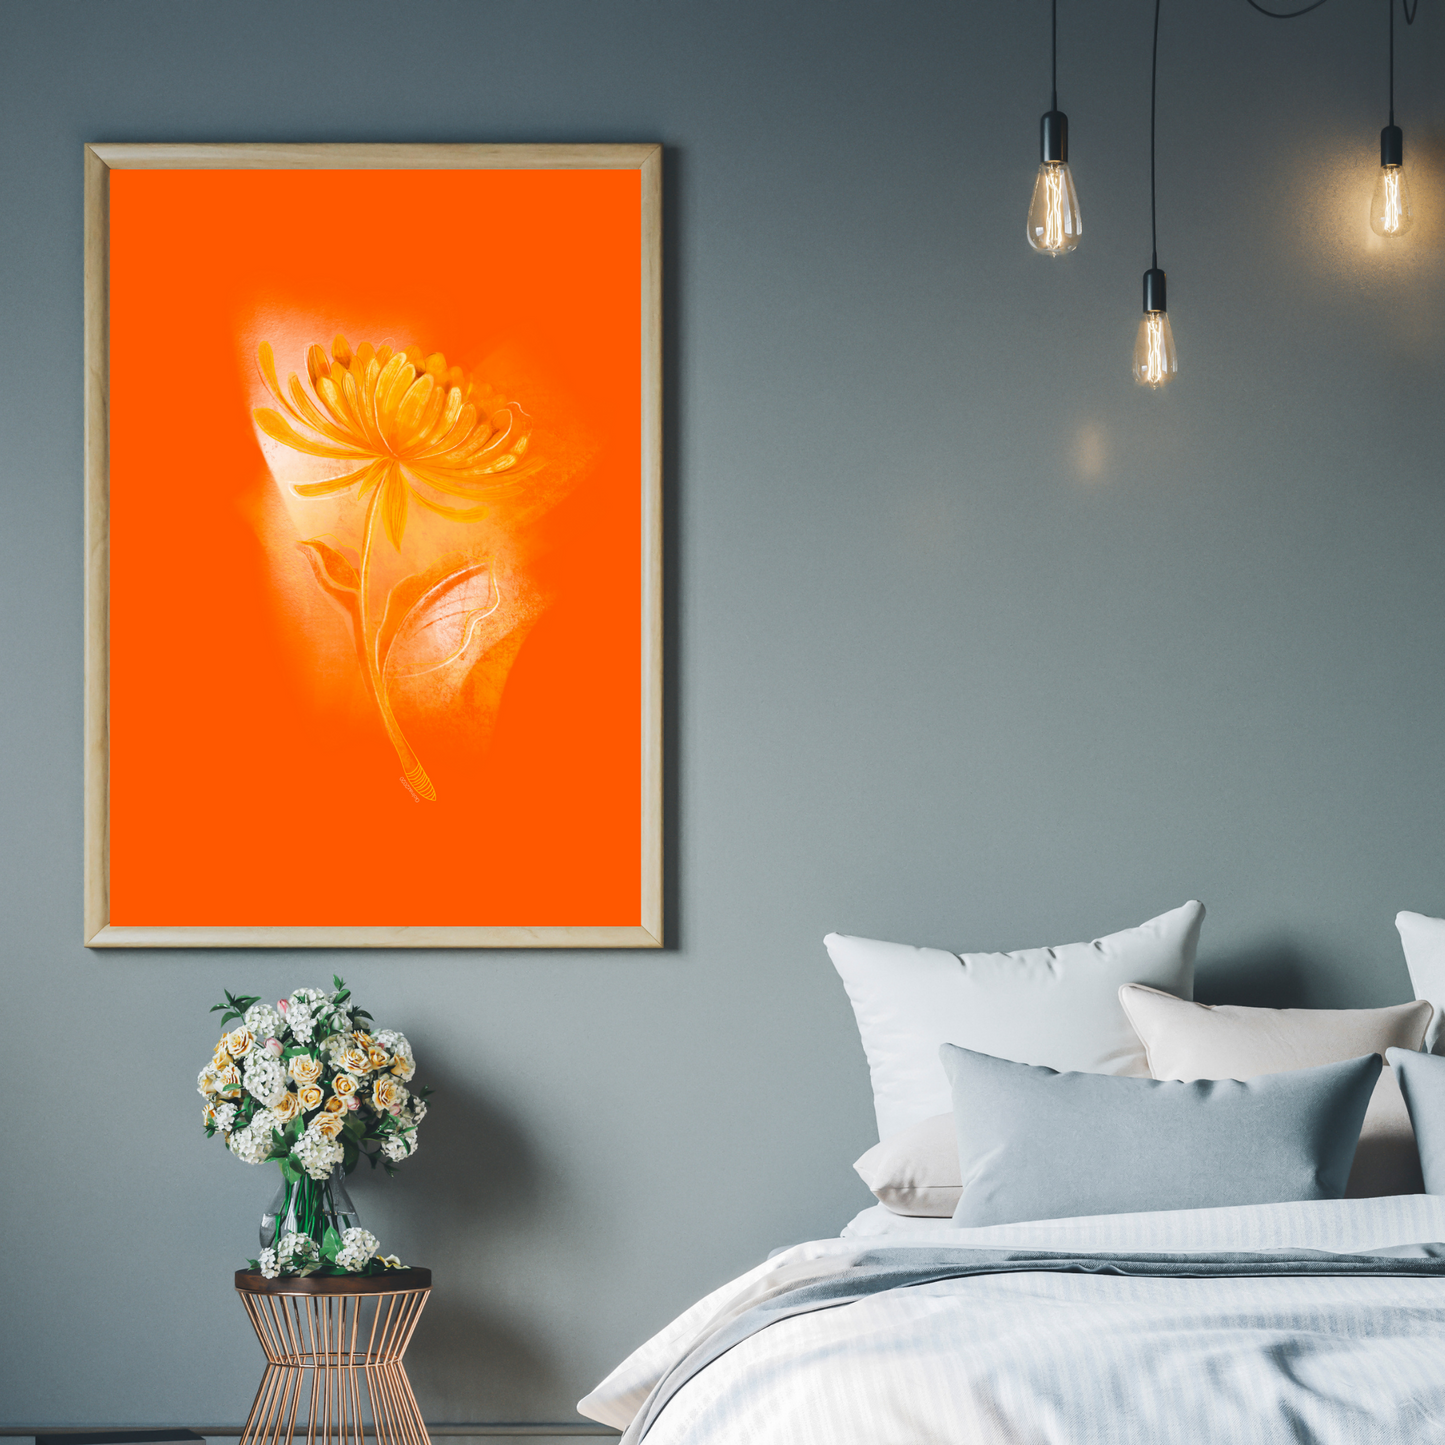 An example of the Chrysanthemum painting by ArisaTeam in a bedroom